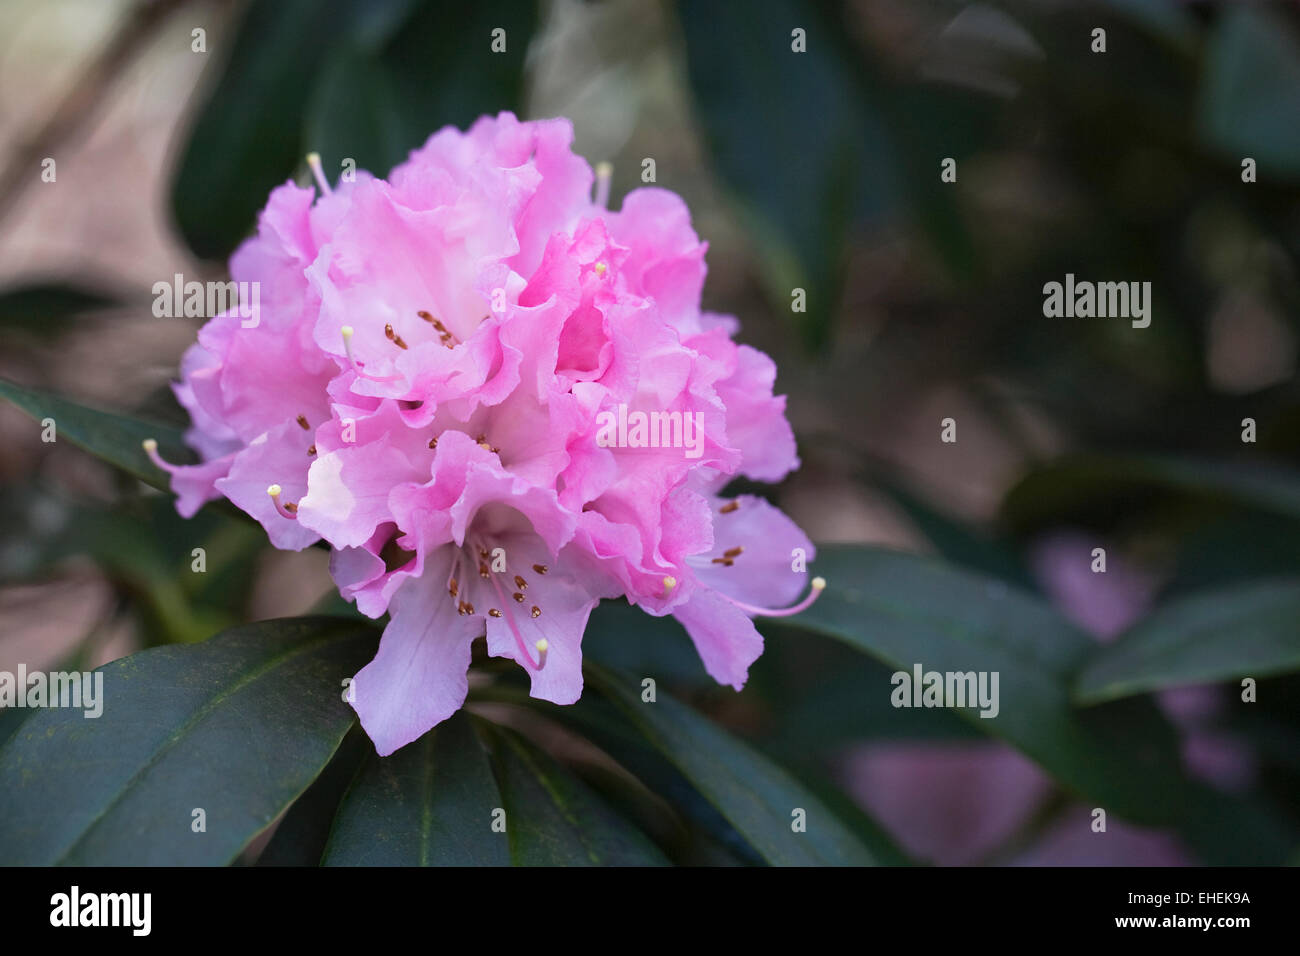 Rhododendron 'Christmas Cheer' flower. Stock Photo